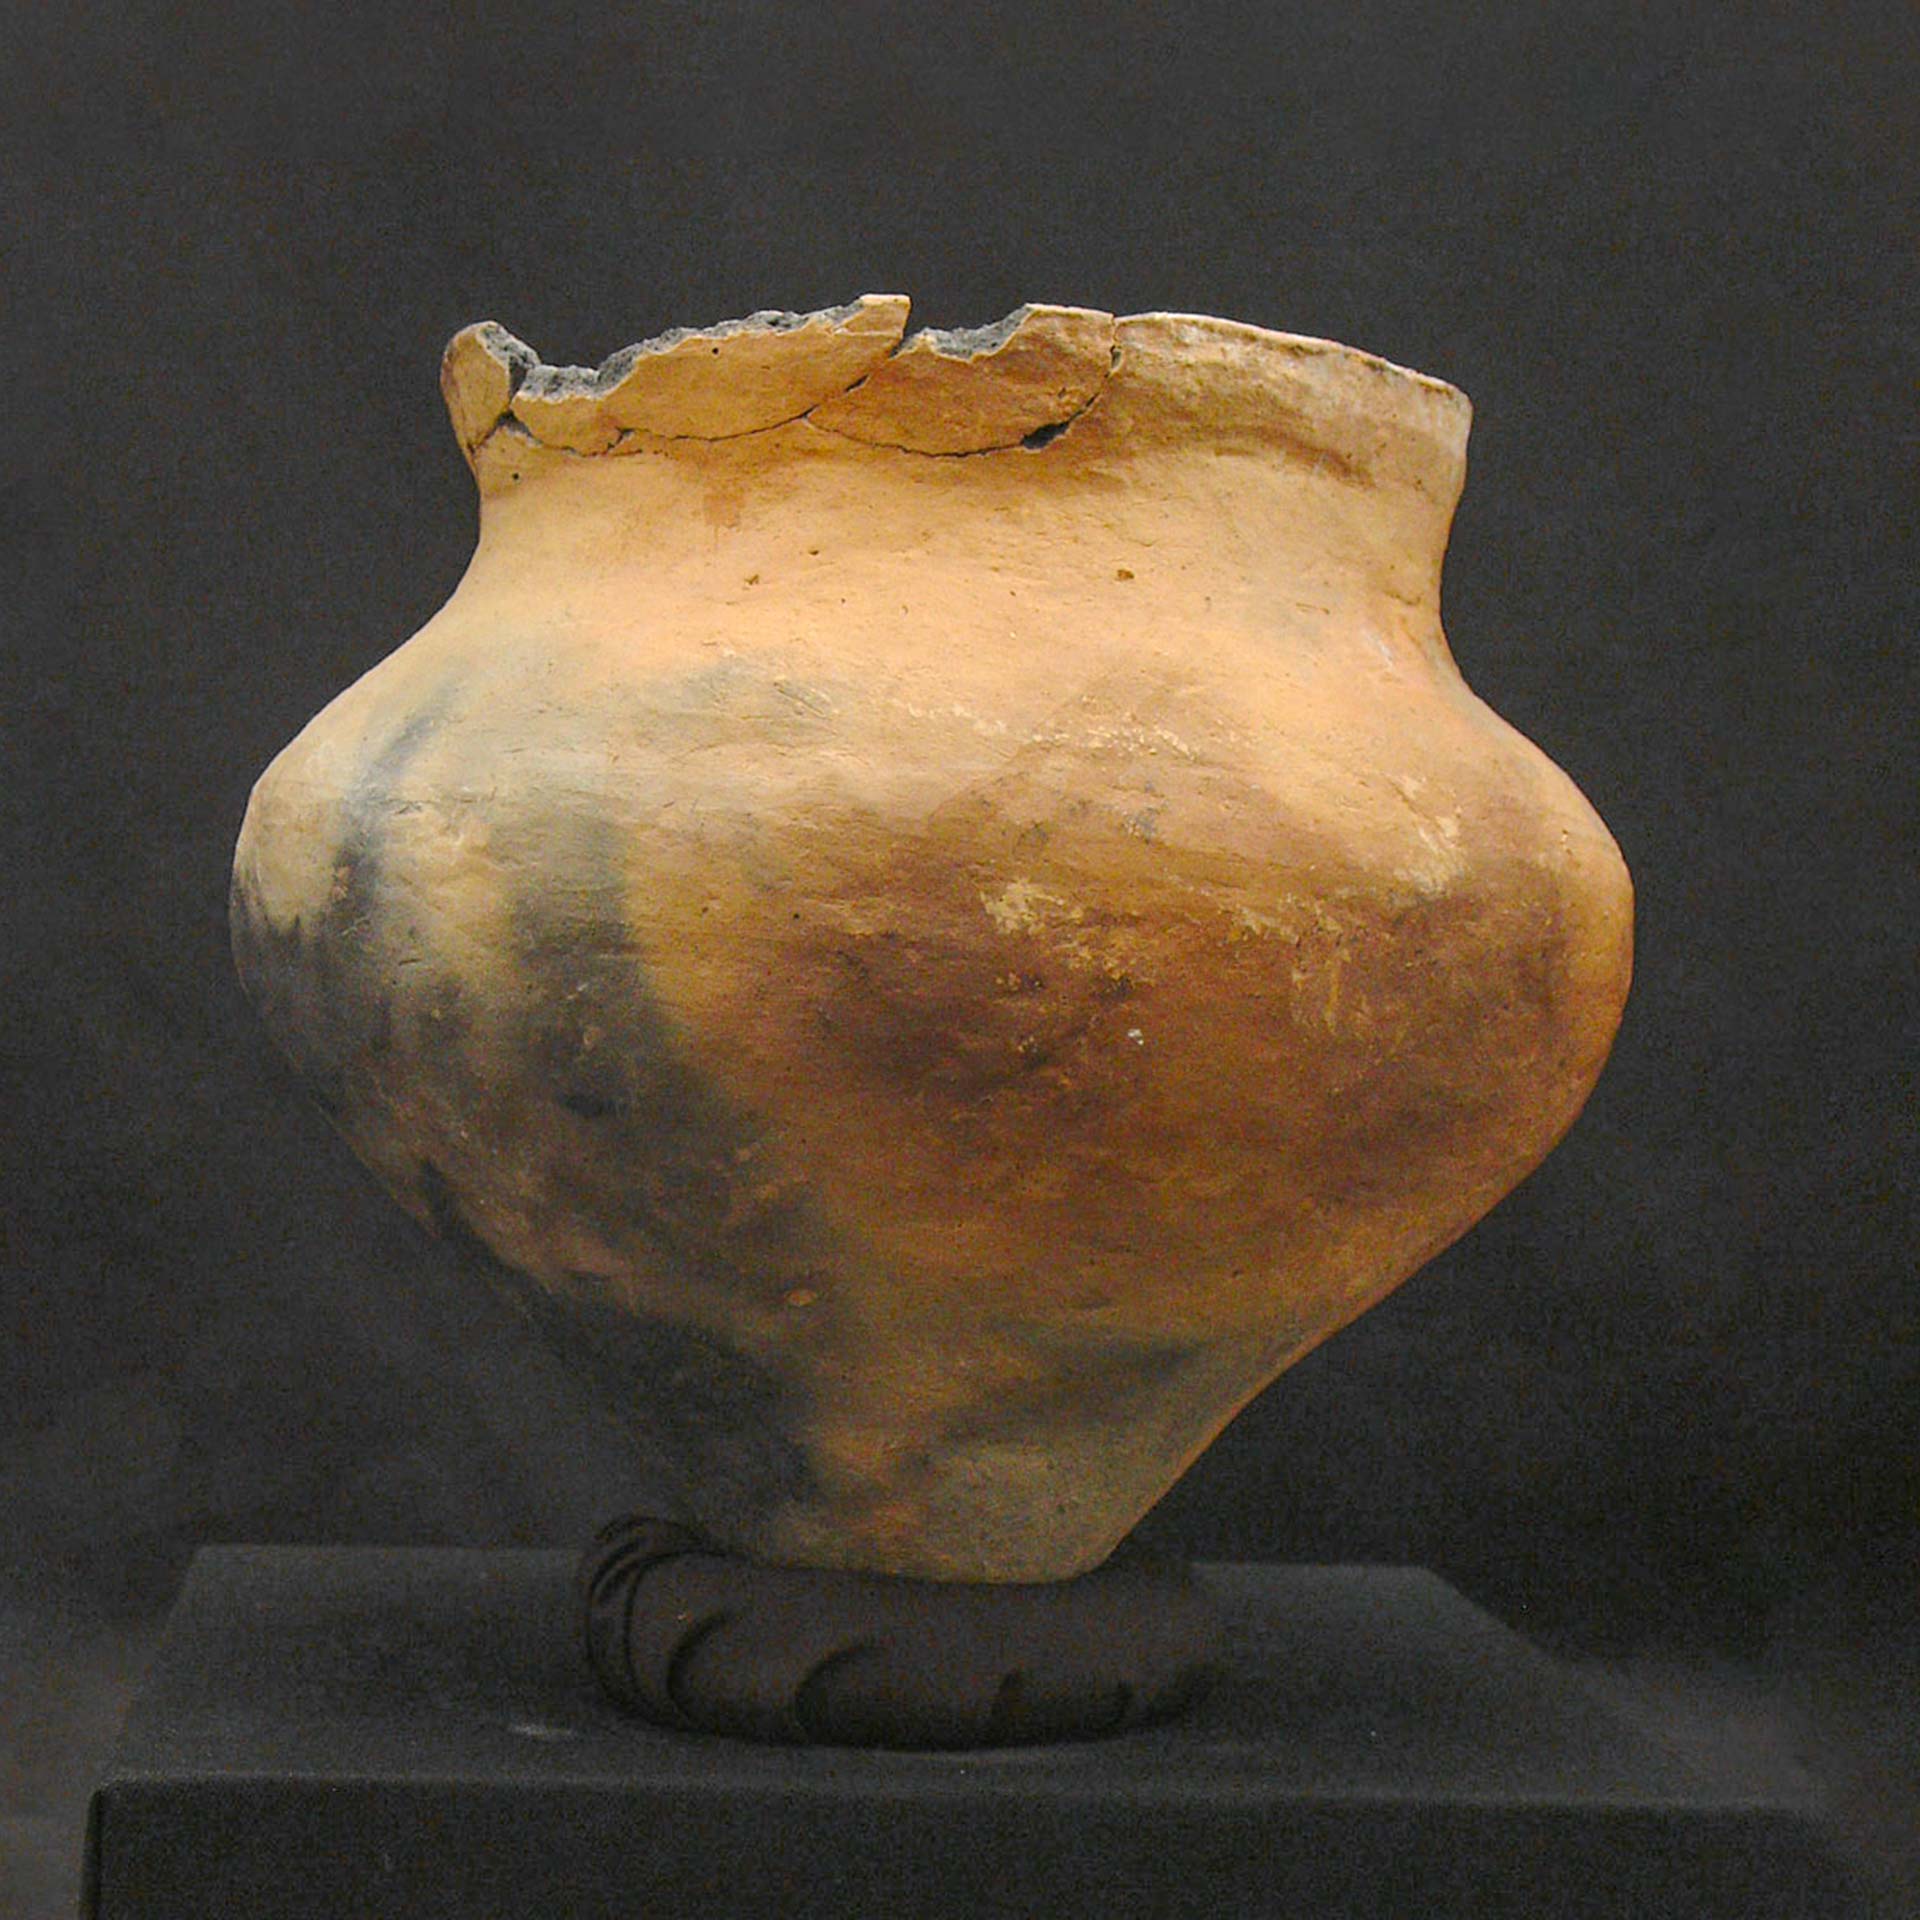 reddish-brown clay pot with black discoloration and a chipped top